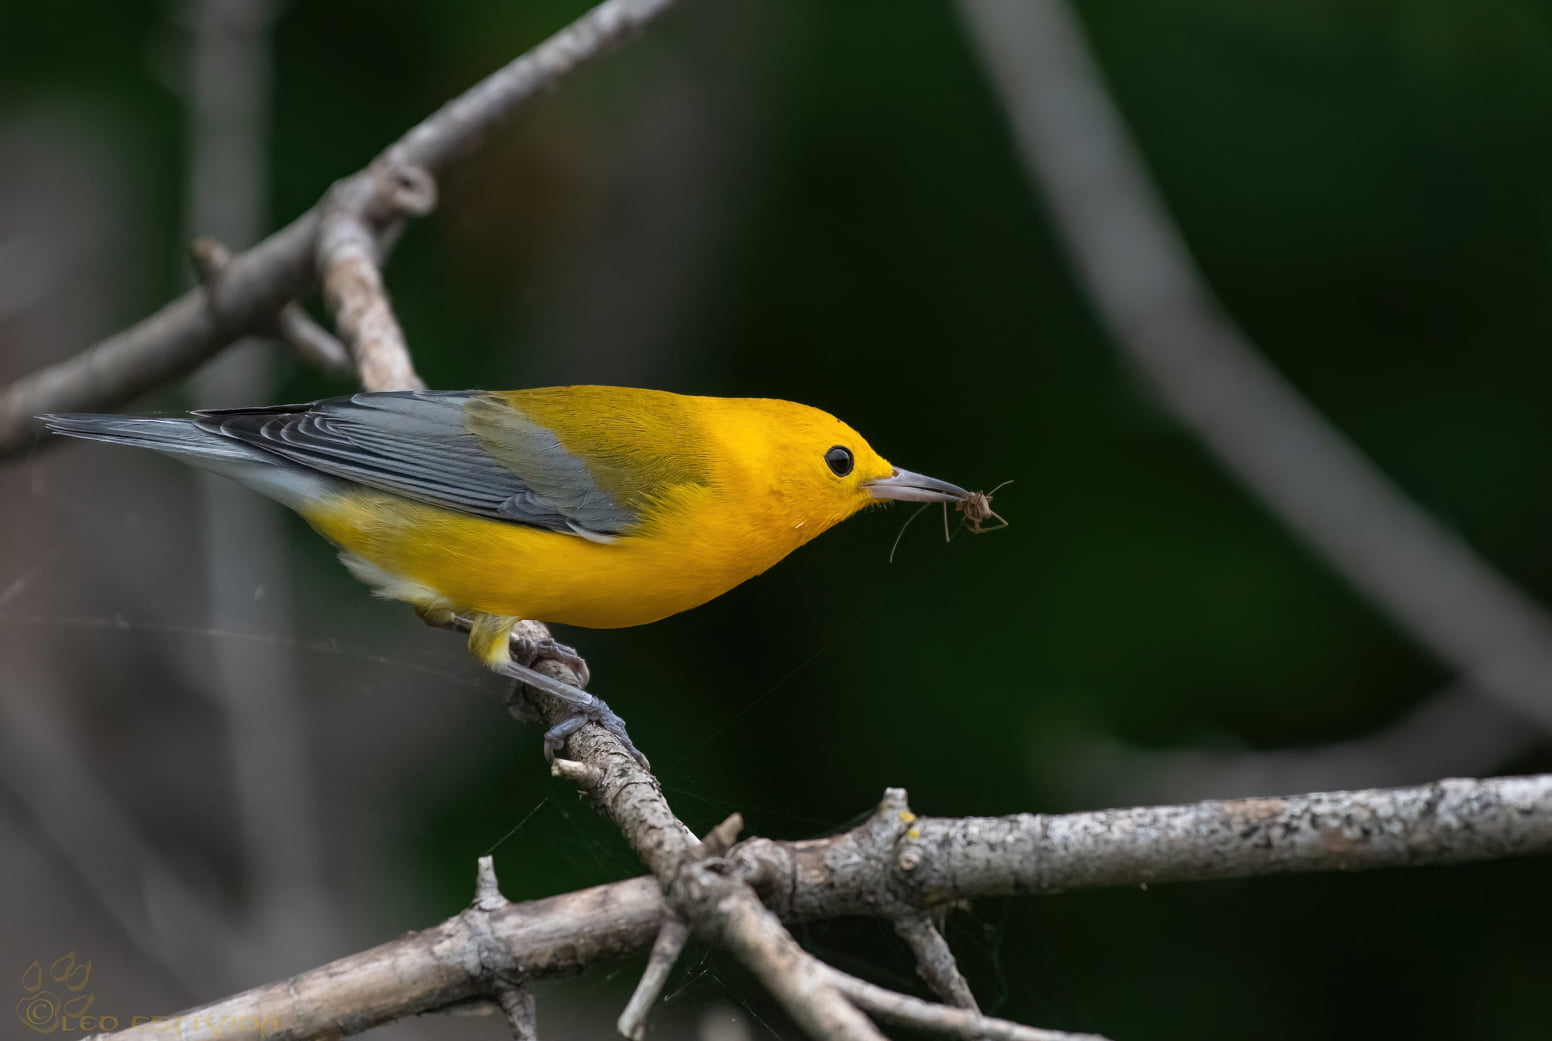 Prothonotary Warbler snacking